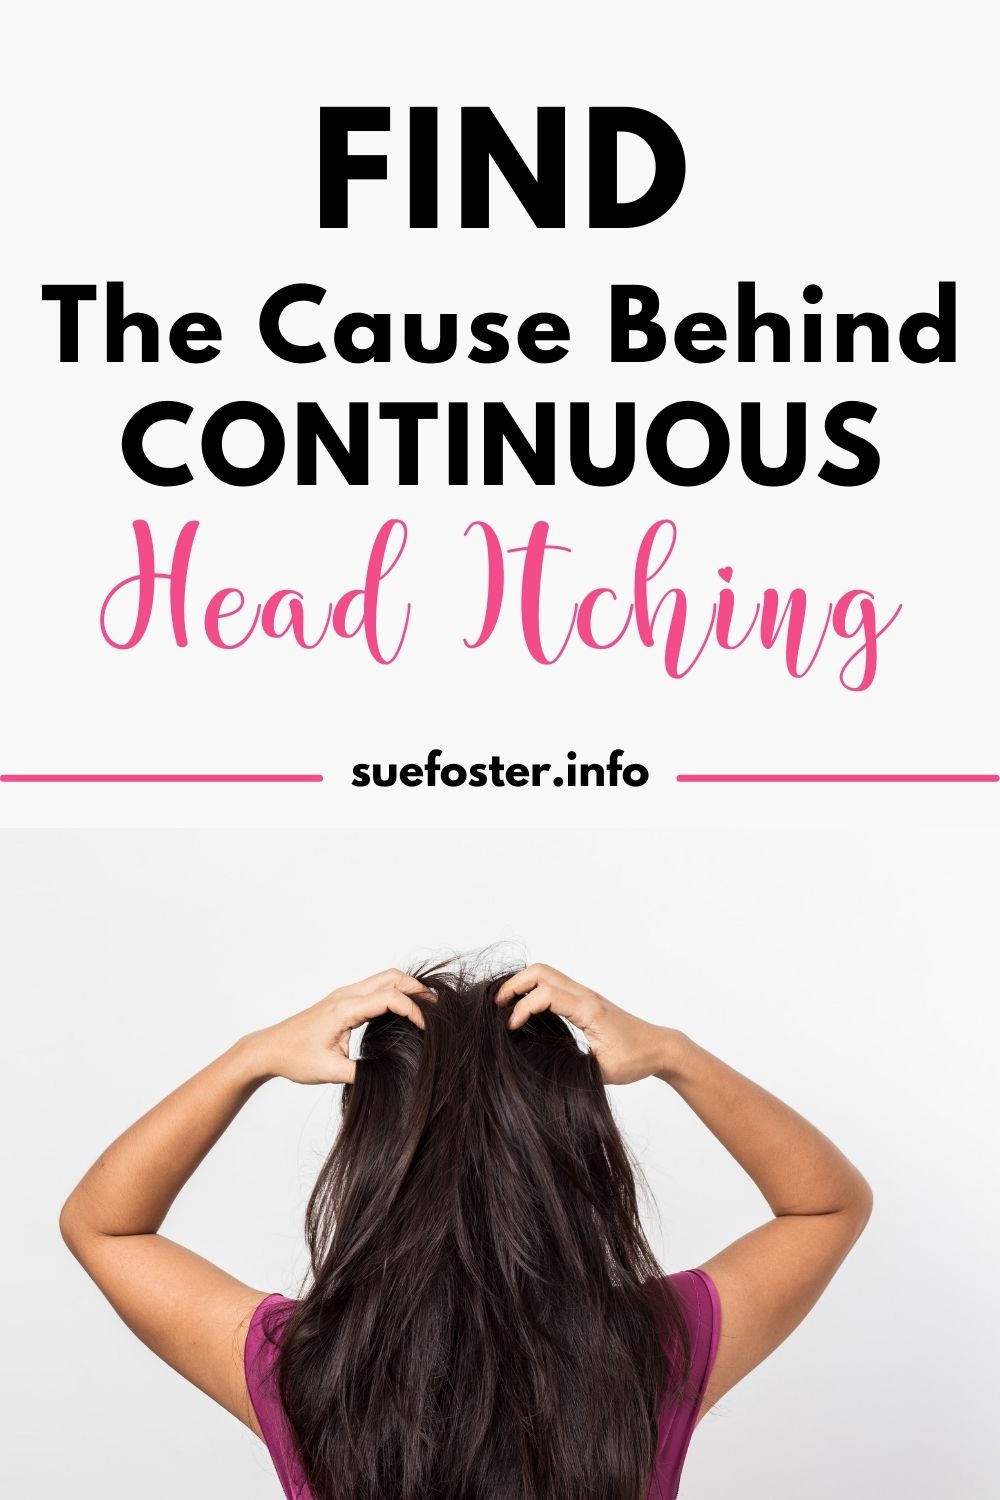 	
An itchy head is quite frustrating because you tend to scratch it frequently. The itches can bring you discomfort, so figure out the cause and learn how to relieve it.